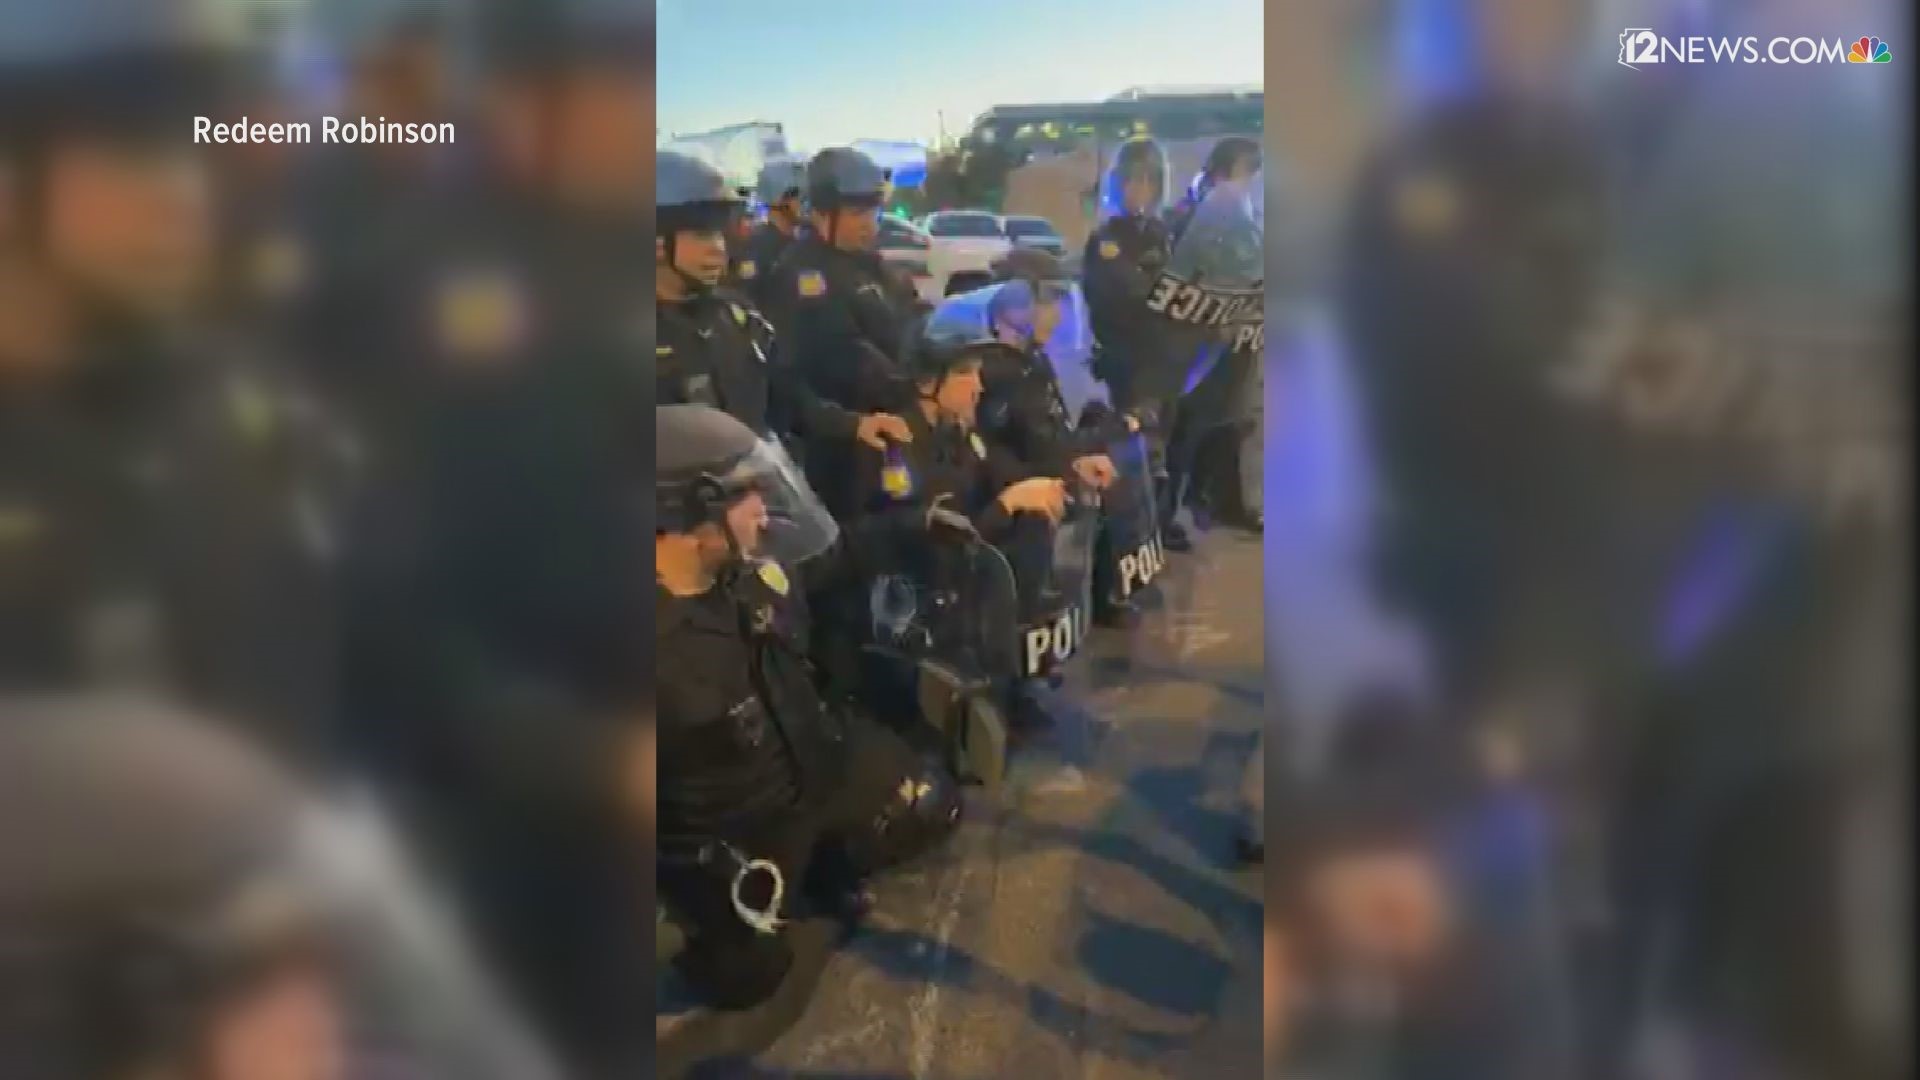 At a protest in downtown Phoenix Monday night, protesters asked Phoenix police officers to take a knee with them. Several officers answered the call and kneeled.